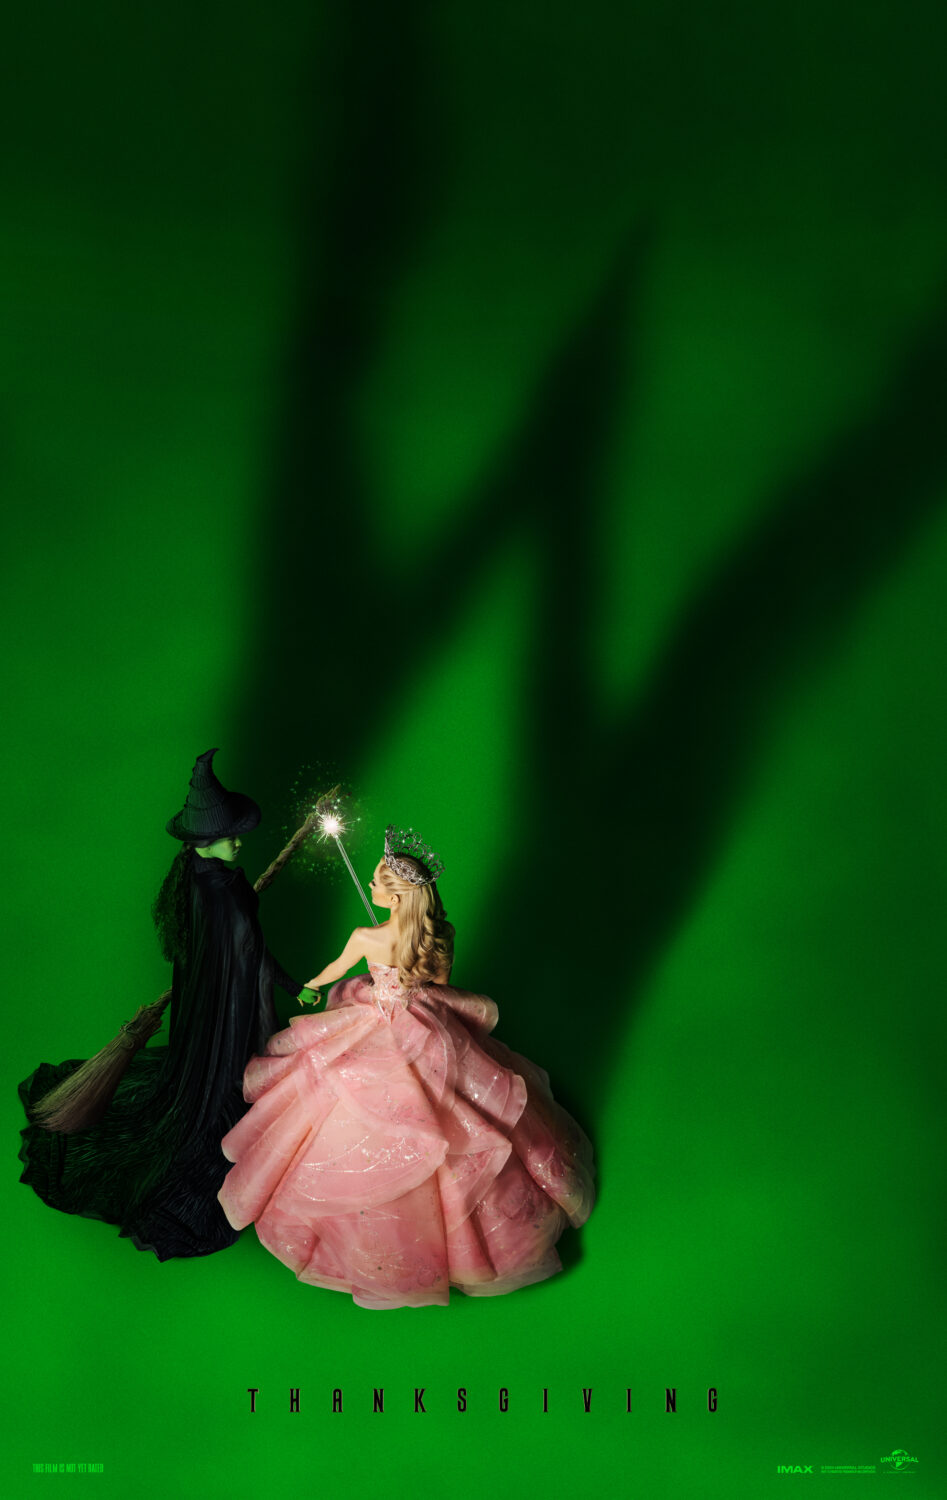 Poster for Wicked the movie, green background with small figurines of Elphaba and Glinda with their shadow making a W